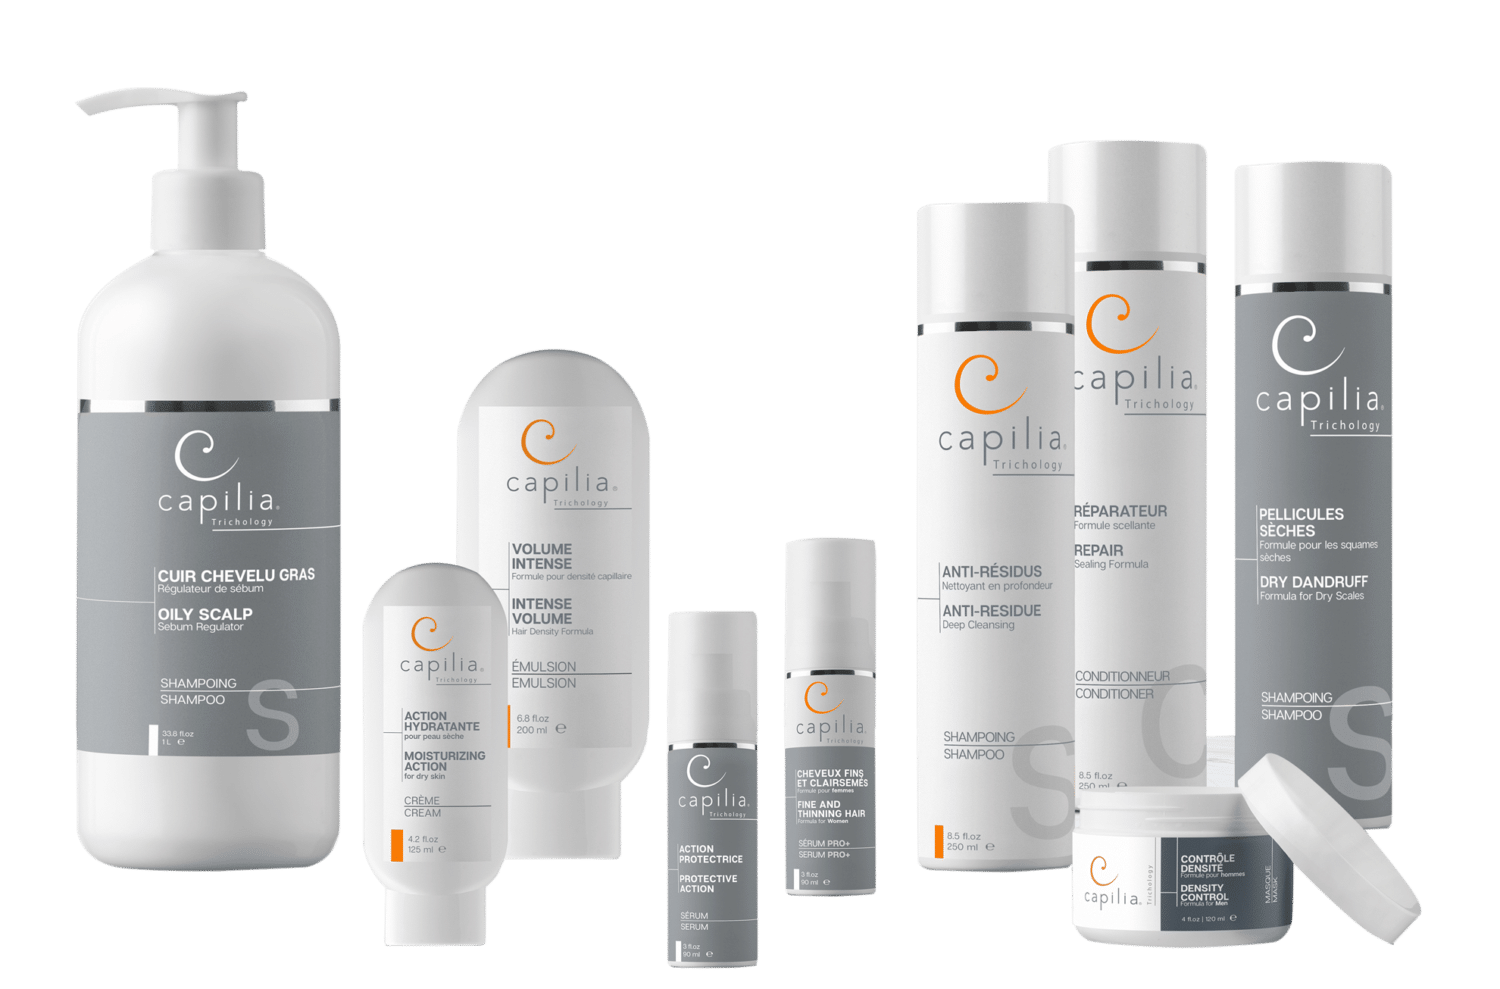 head first capilia products for hair loss